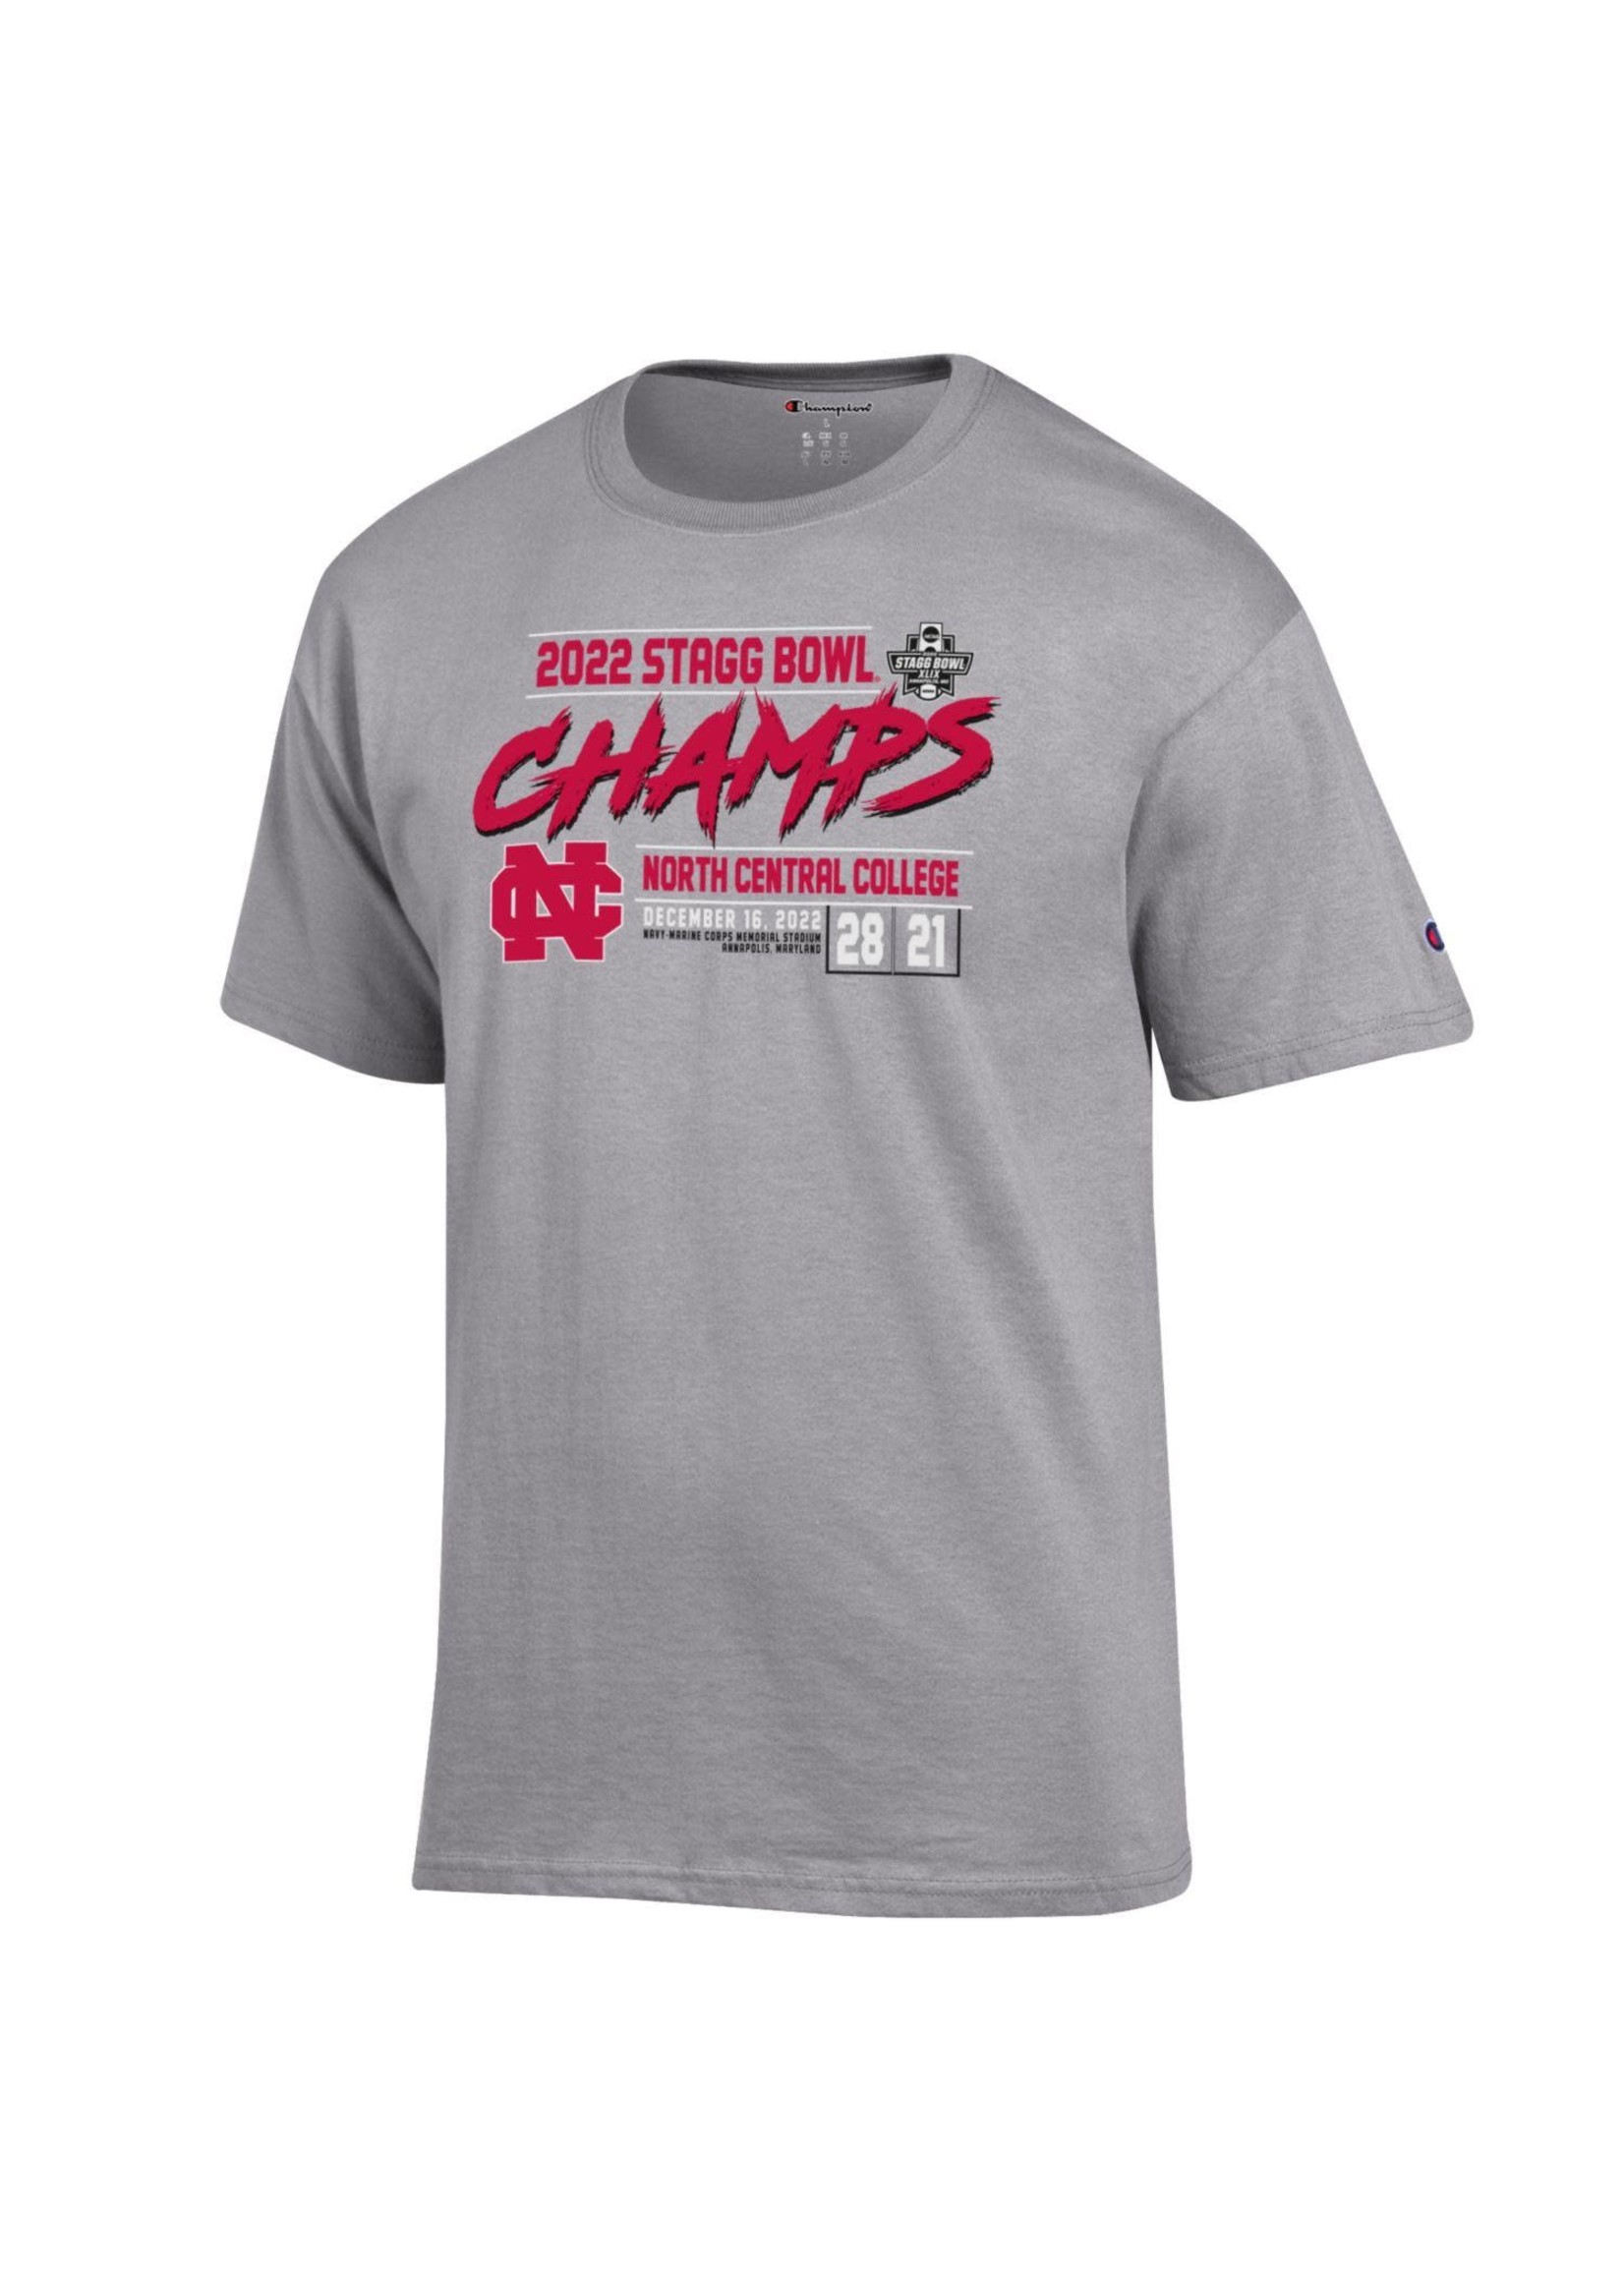 2022 Stagg Bowl Tee w/ College Store Campus - Score by Central Champion North